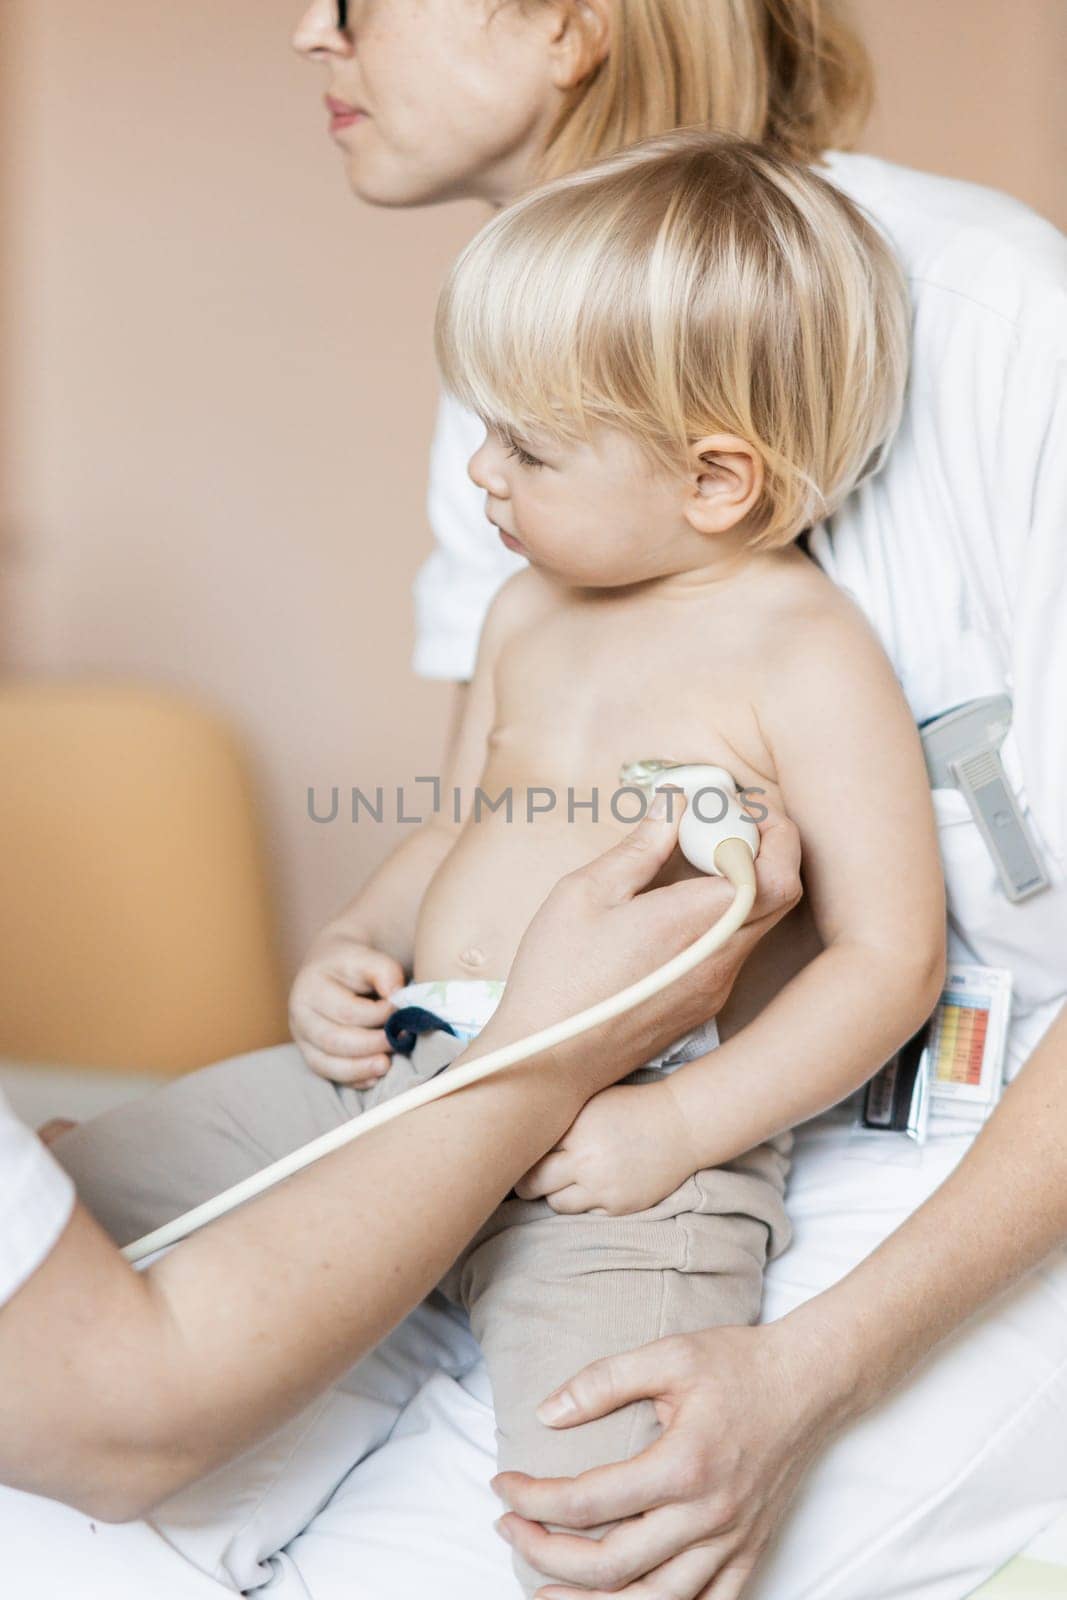 Small child being checked for heart murmur by heart ultrasound exam by cardiologist as part of regular medical checkout at pediatrician. by kasto